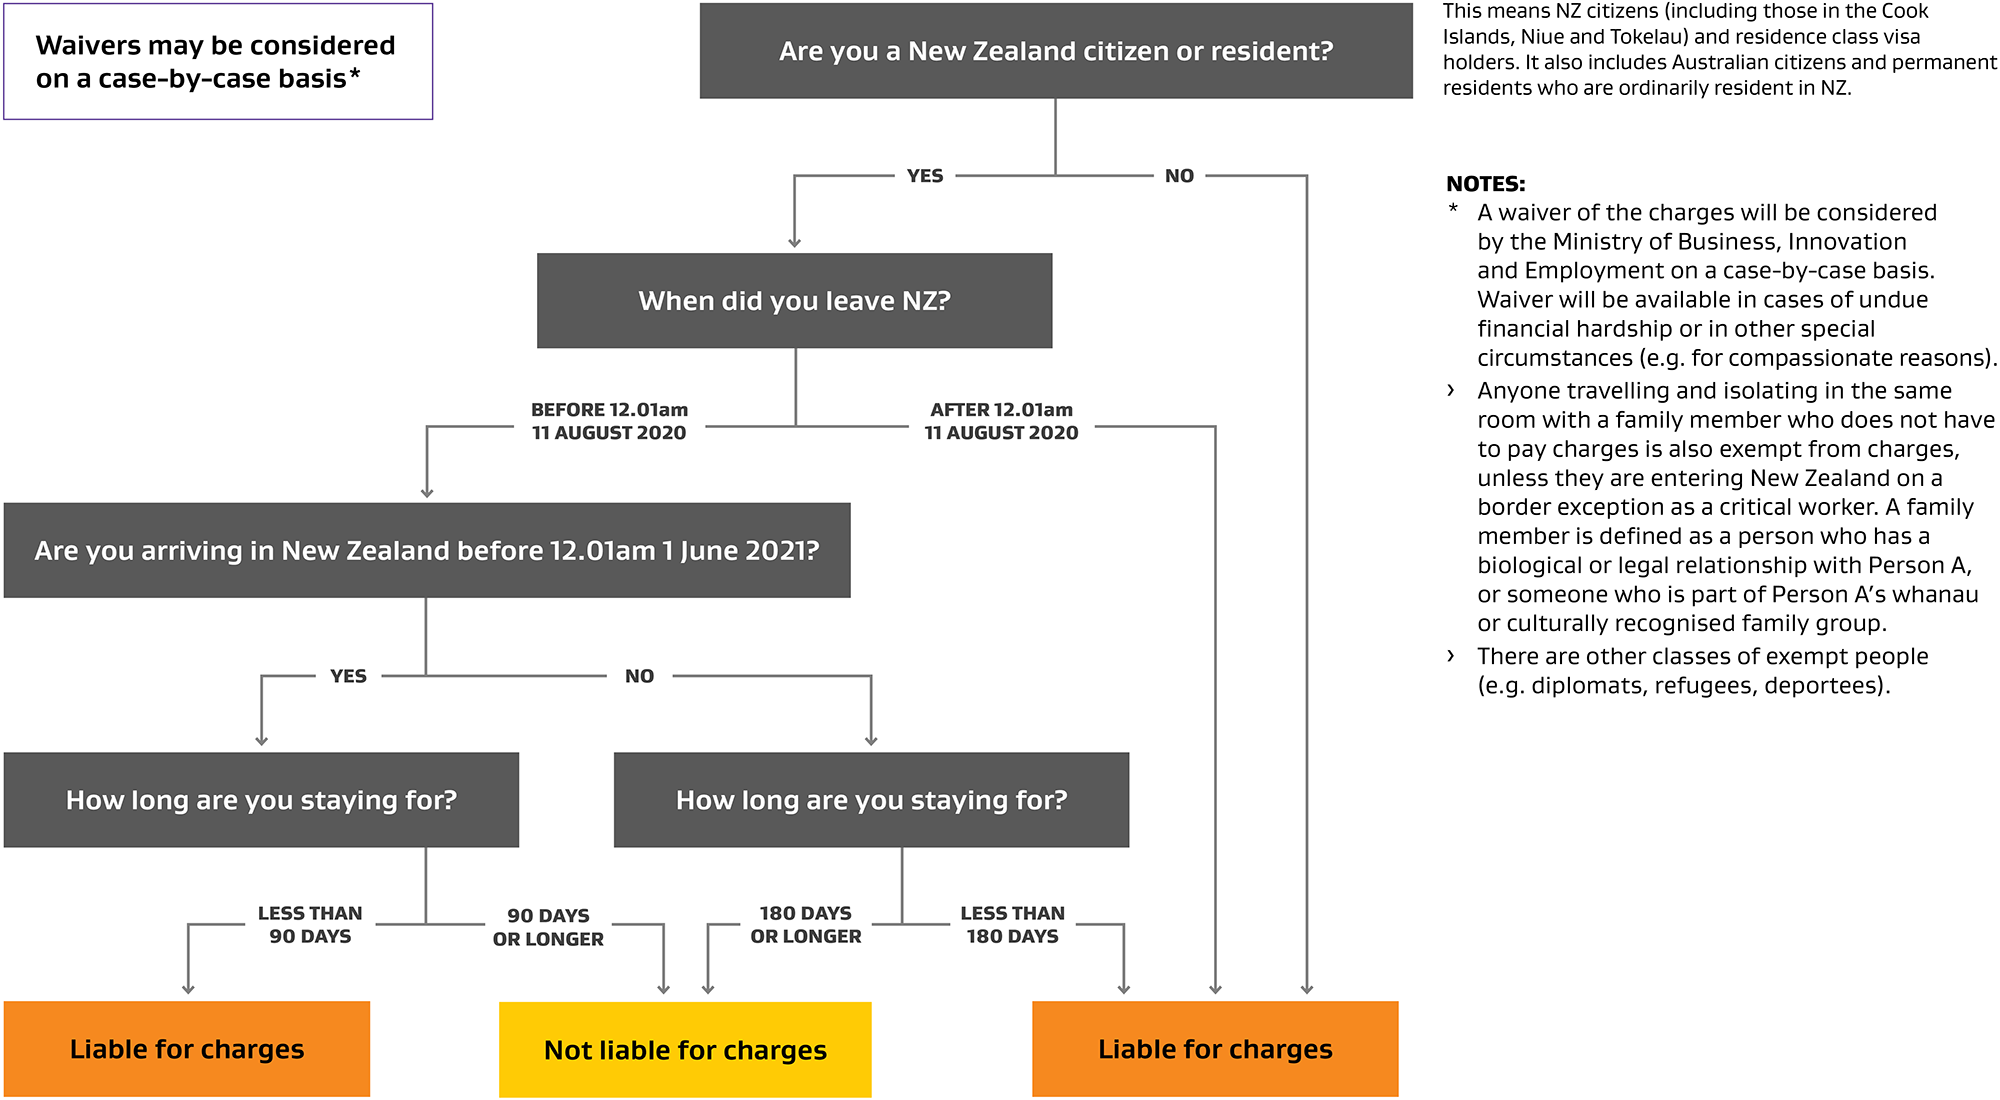 Flowchart showing liability for managed isolation and quarantine charges